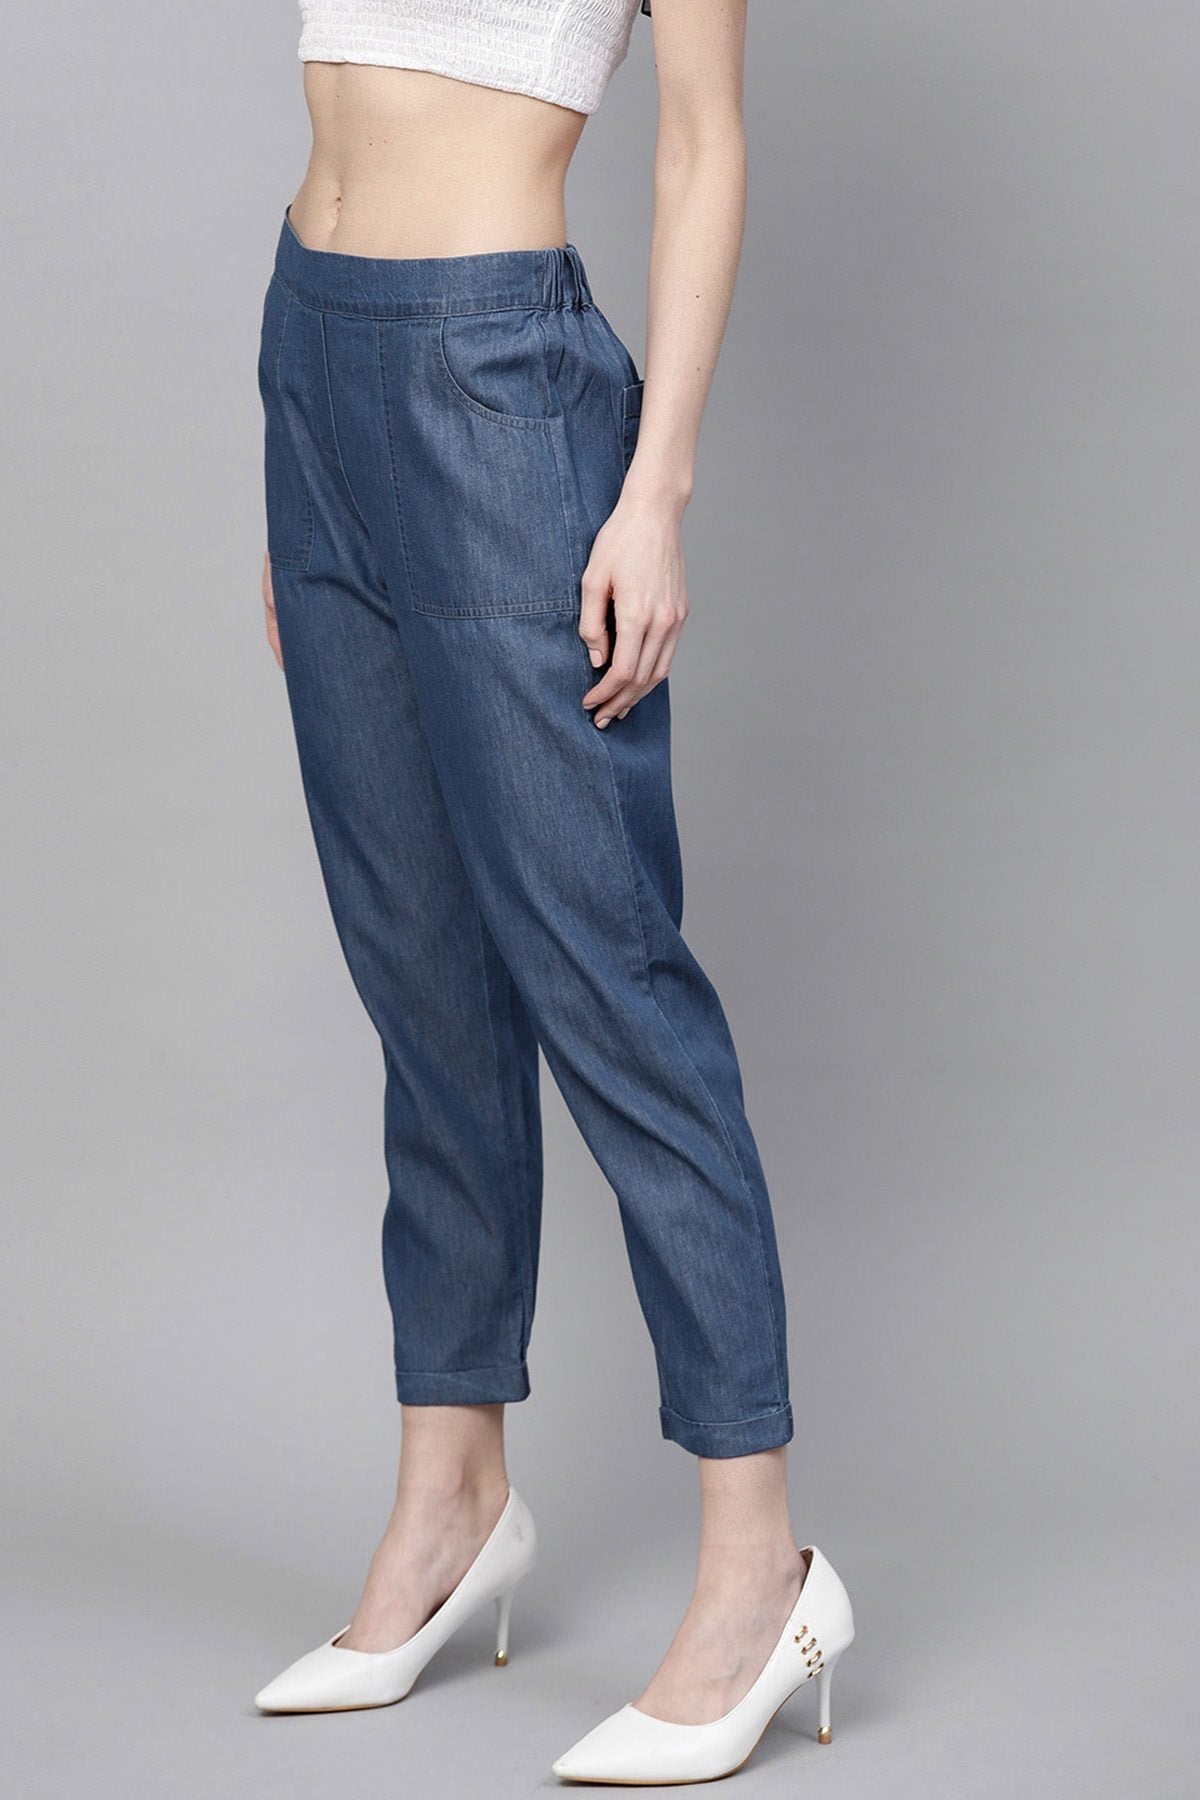 Women's Blue Denim Tapered Roll-Up Pants - Final Clearance Sale